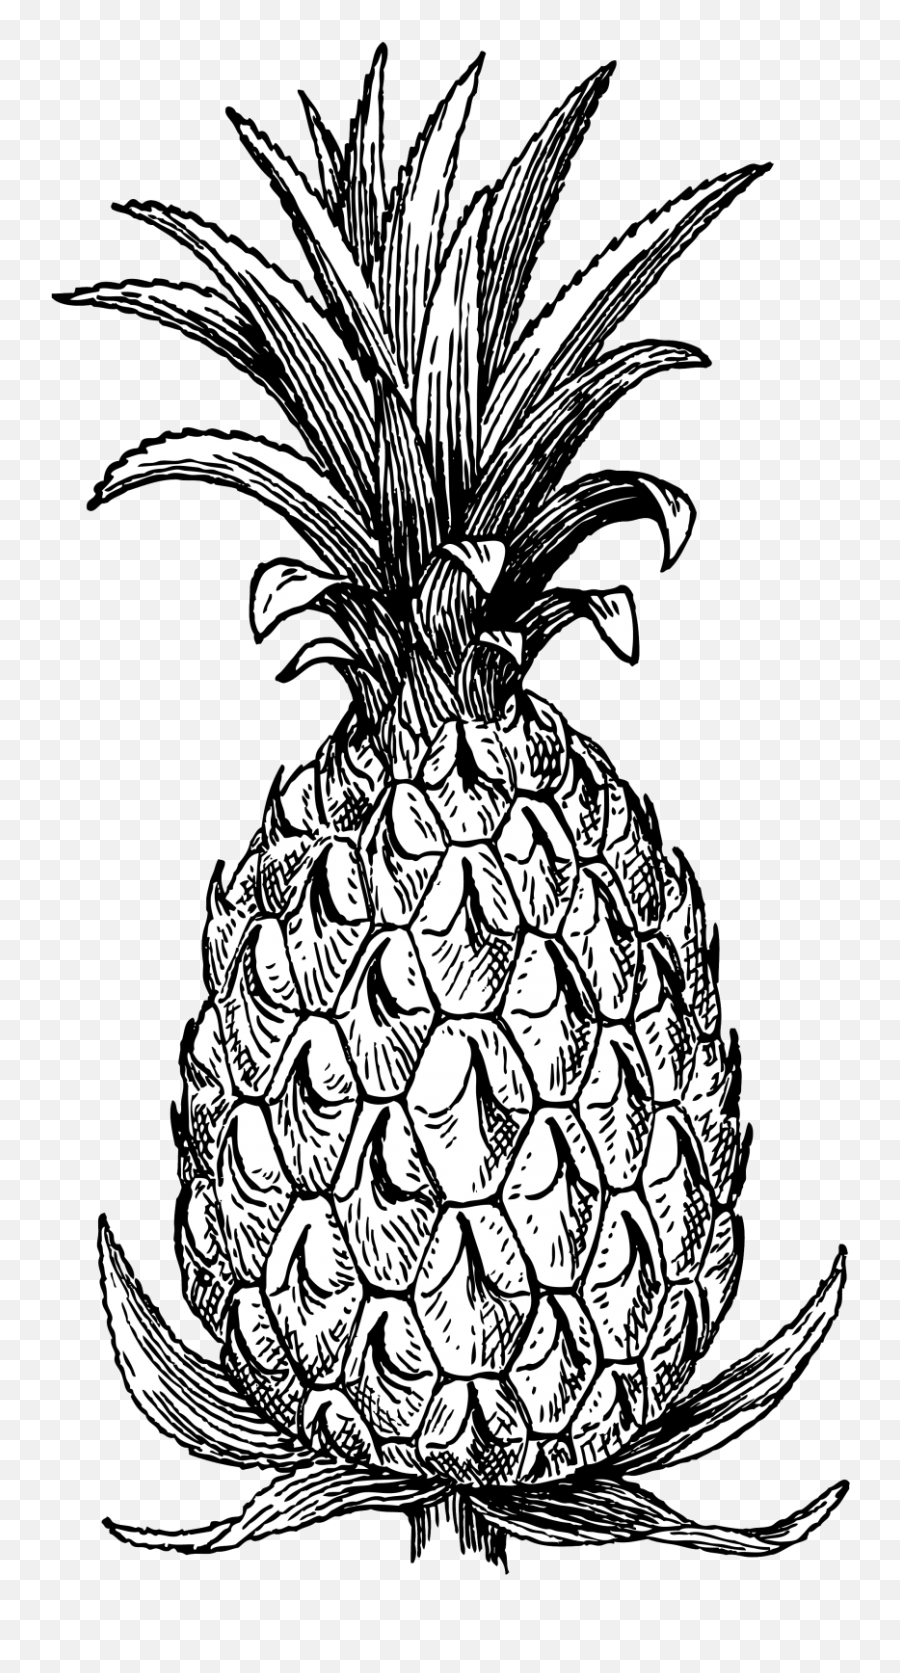 Pineapple Drawing Free Stock Photo - Public Domain Pictures Pineapple Png,Pineapple Transparent Background